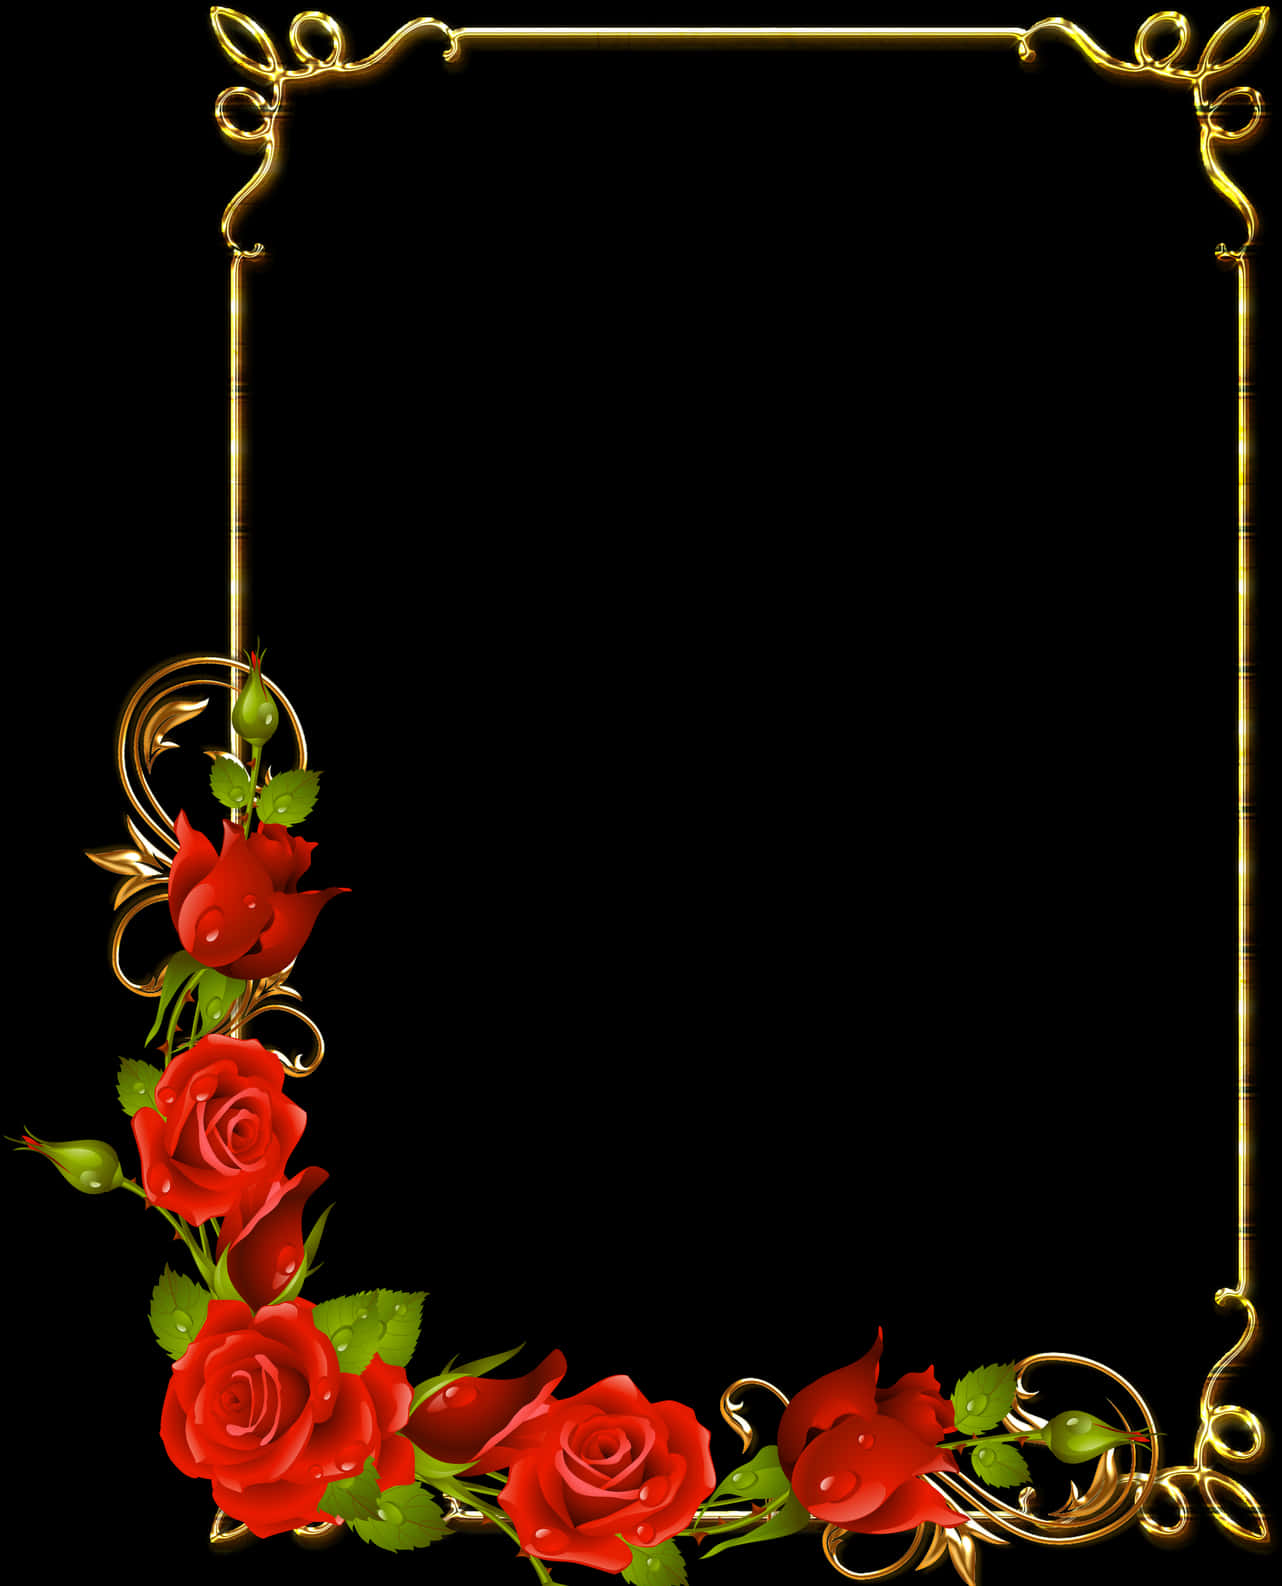 A Gold Frame With Red Roses